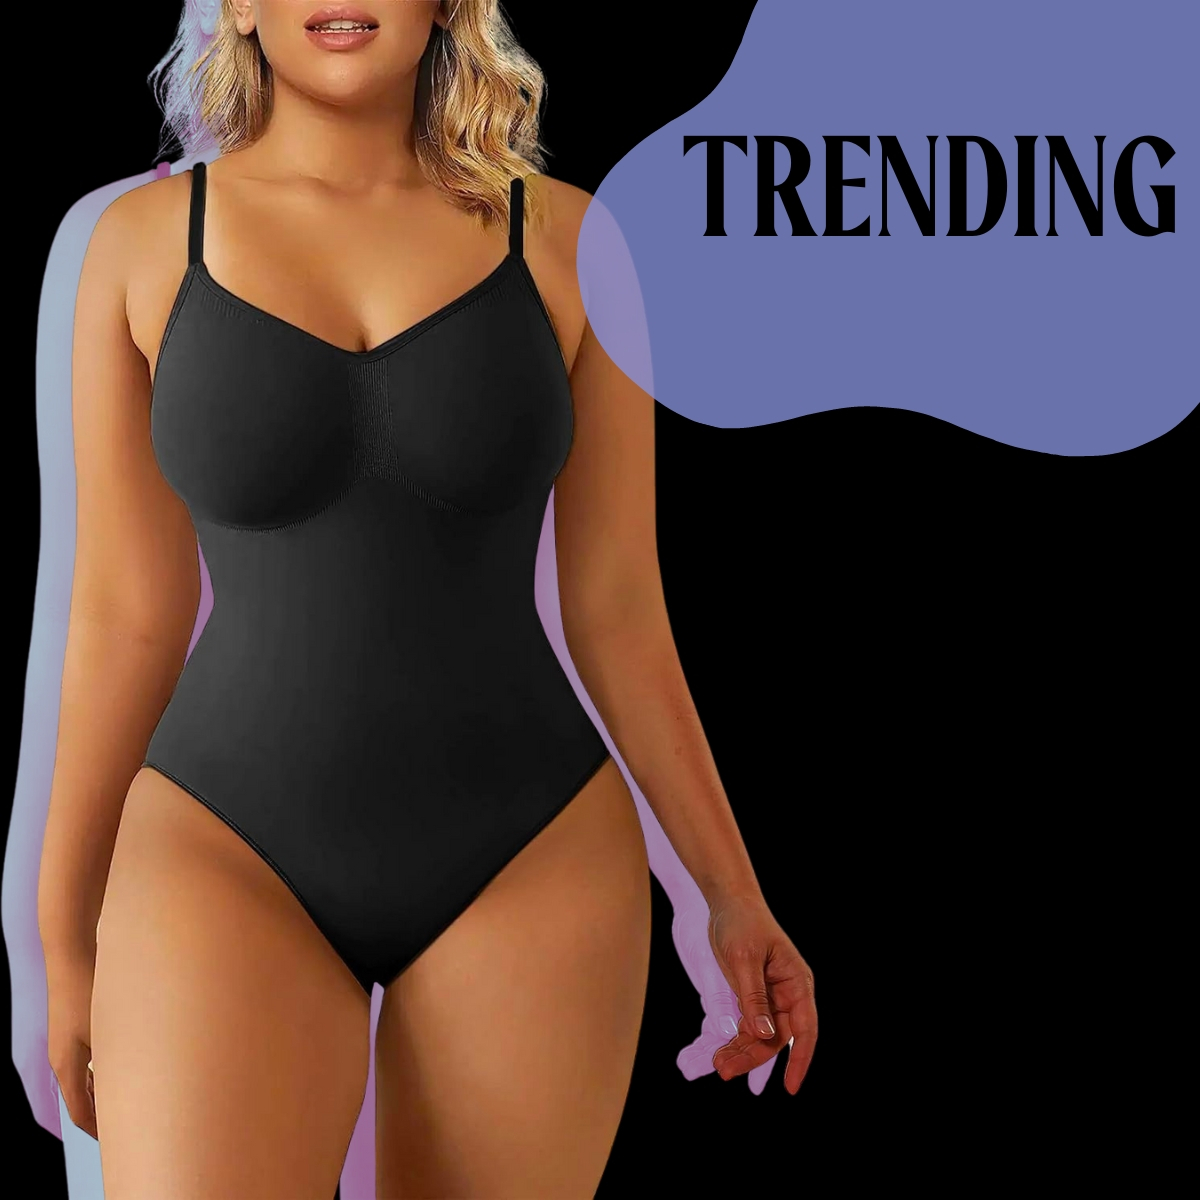 Top-Rated Shapewear To Help You Look and Feel Your Best: SKIMS, Spanx,  Shapermint, Maidenform, and More